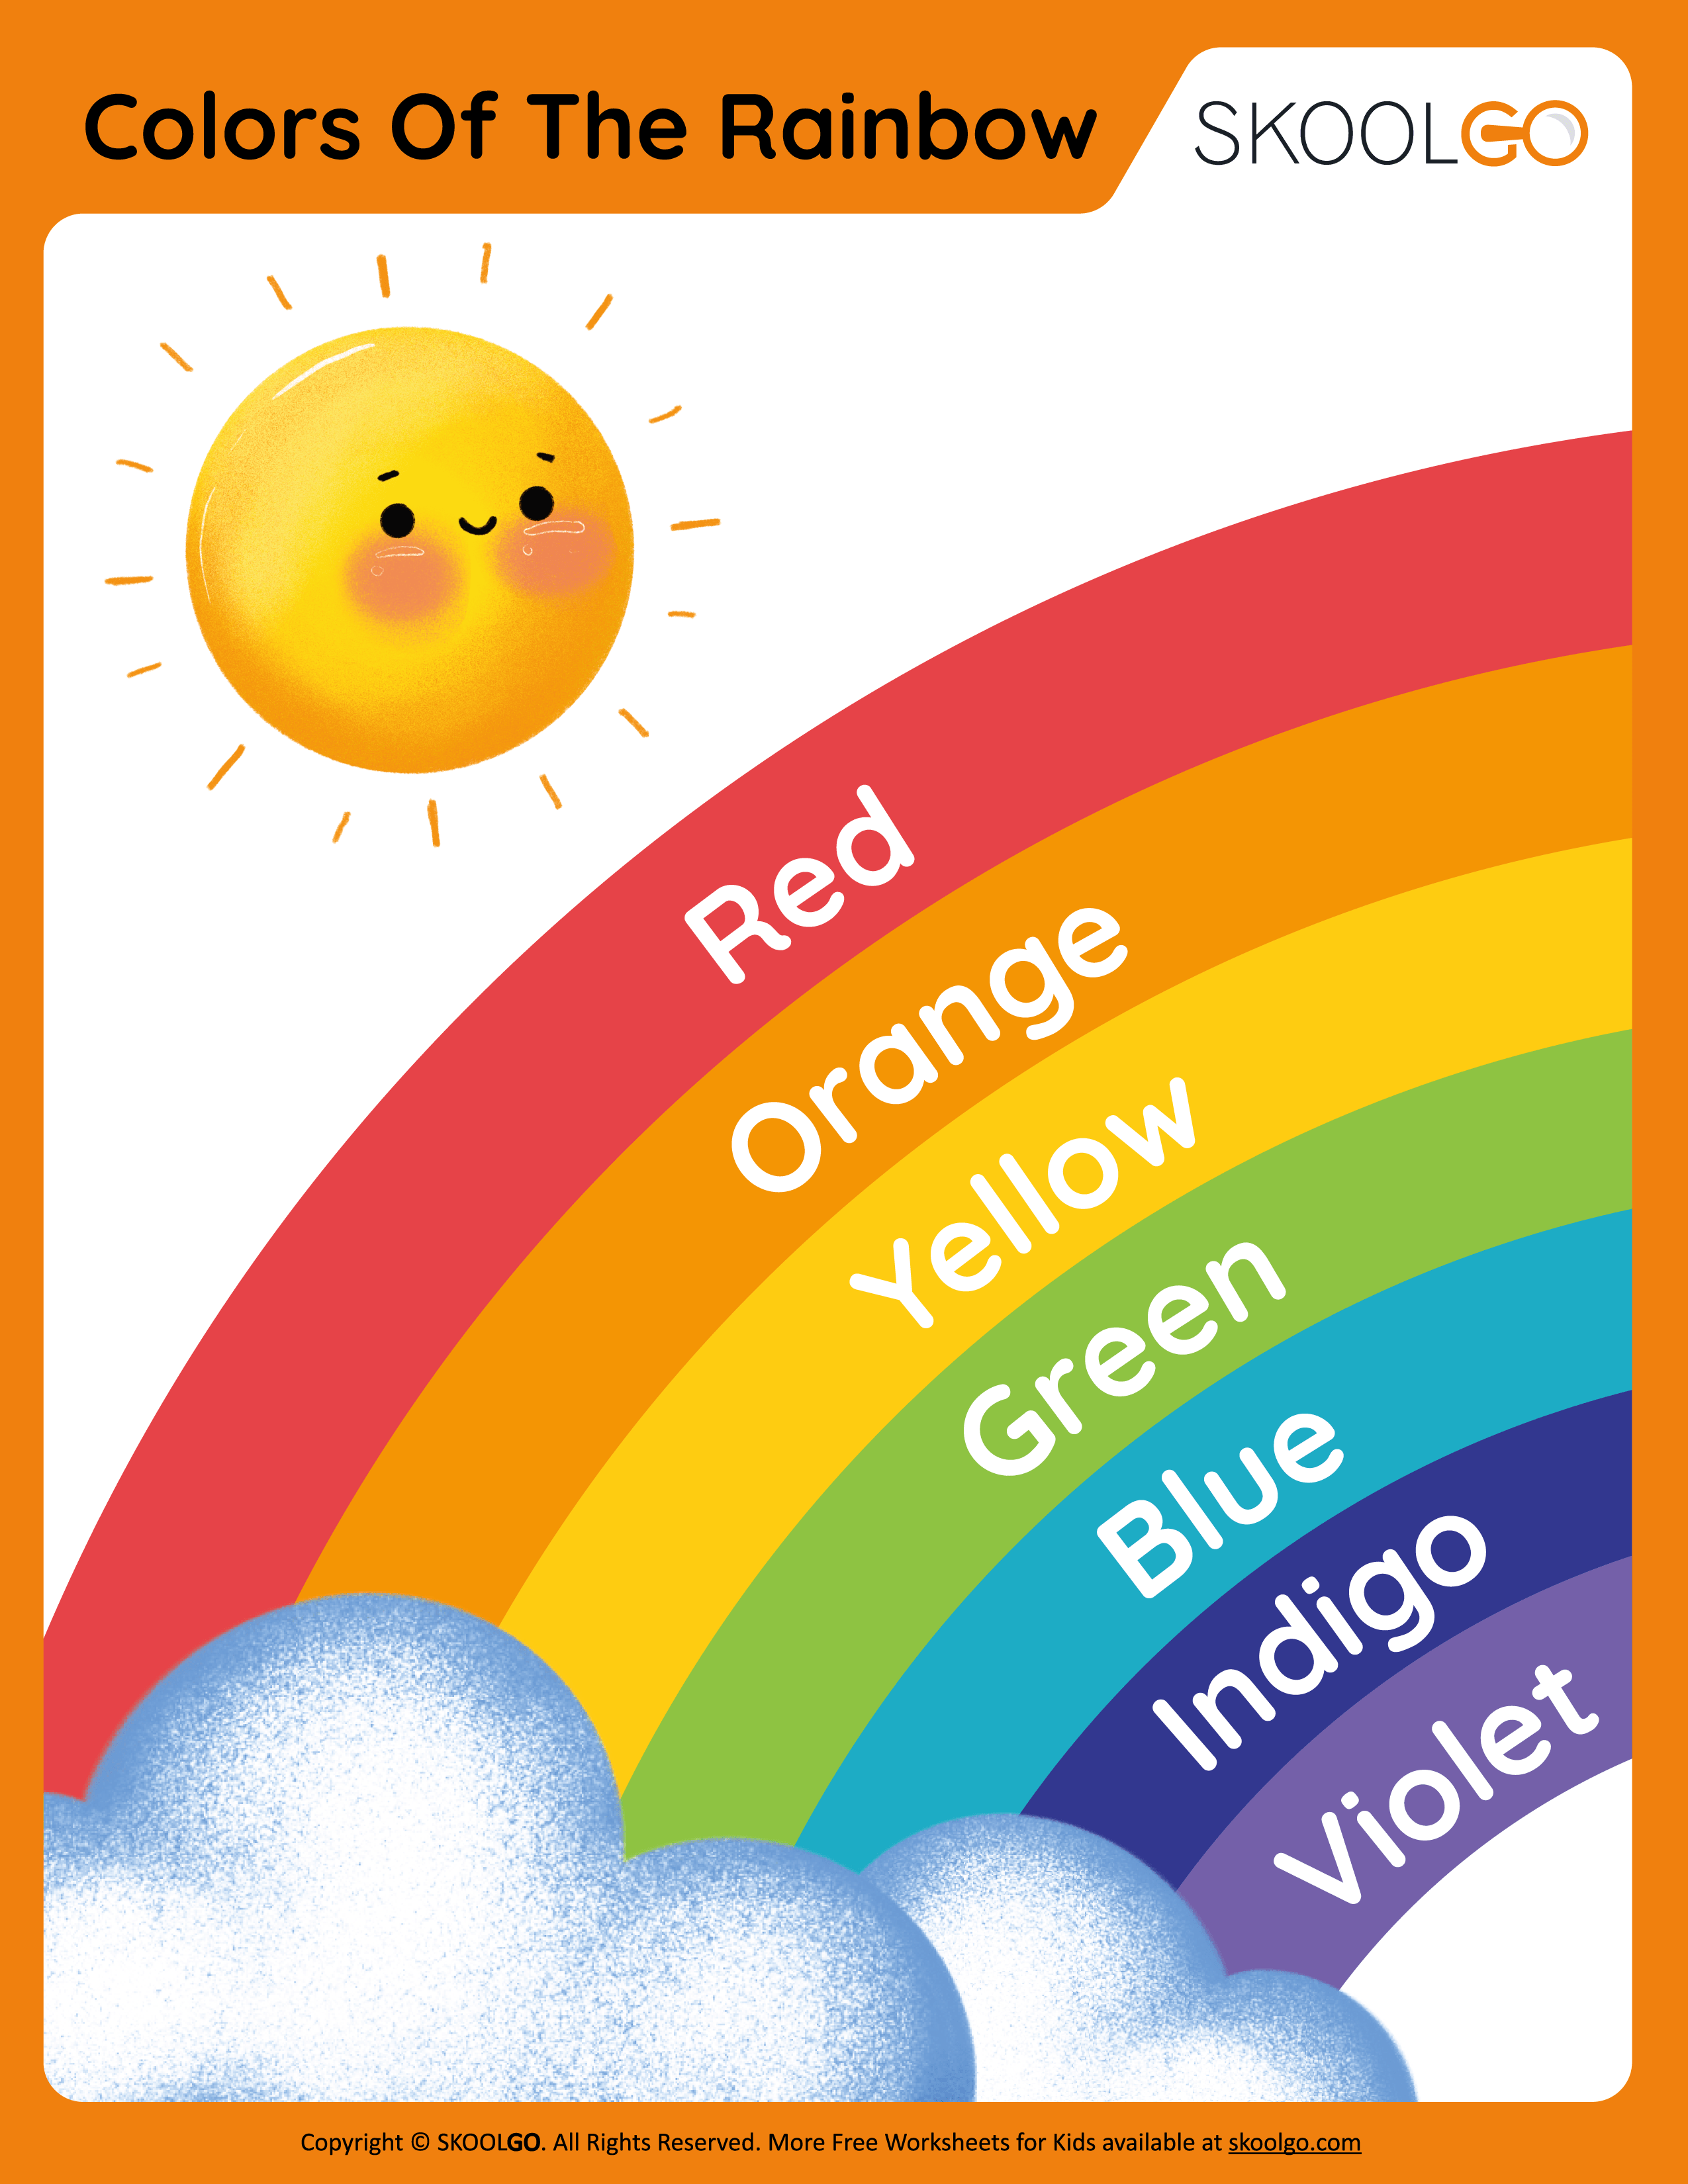 Colors Of The Rainbow - Free Worksheet for Kids